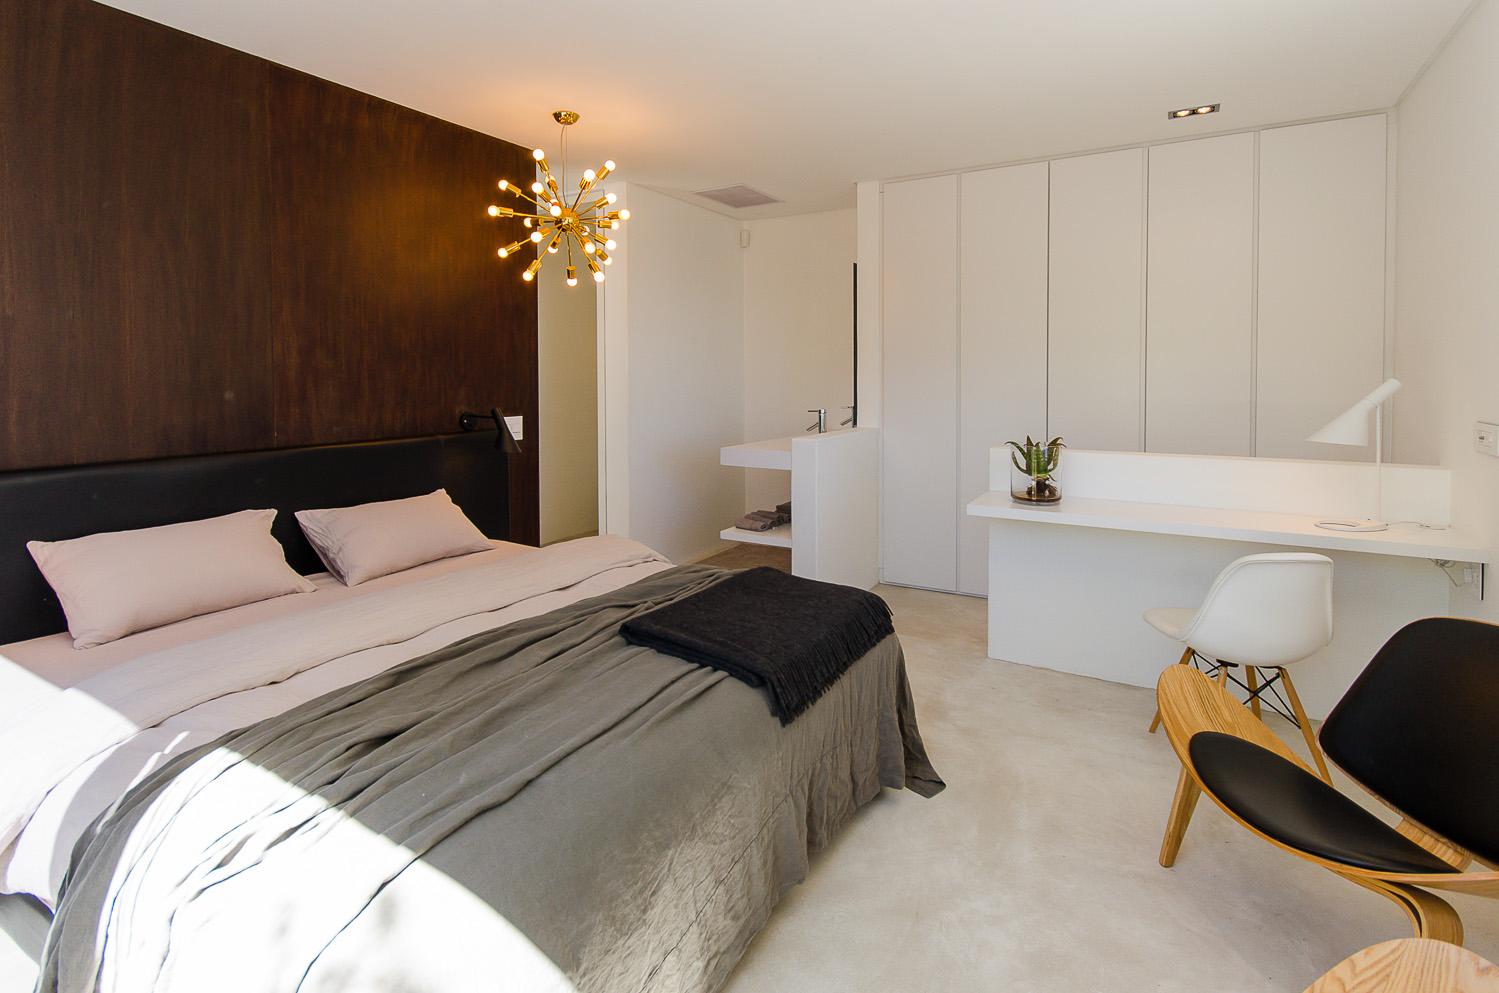 Photo 4 of Strathmore Dream accommodation in Camps Bay, Cape Town with 4 bedrooms and 3 bathrooms